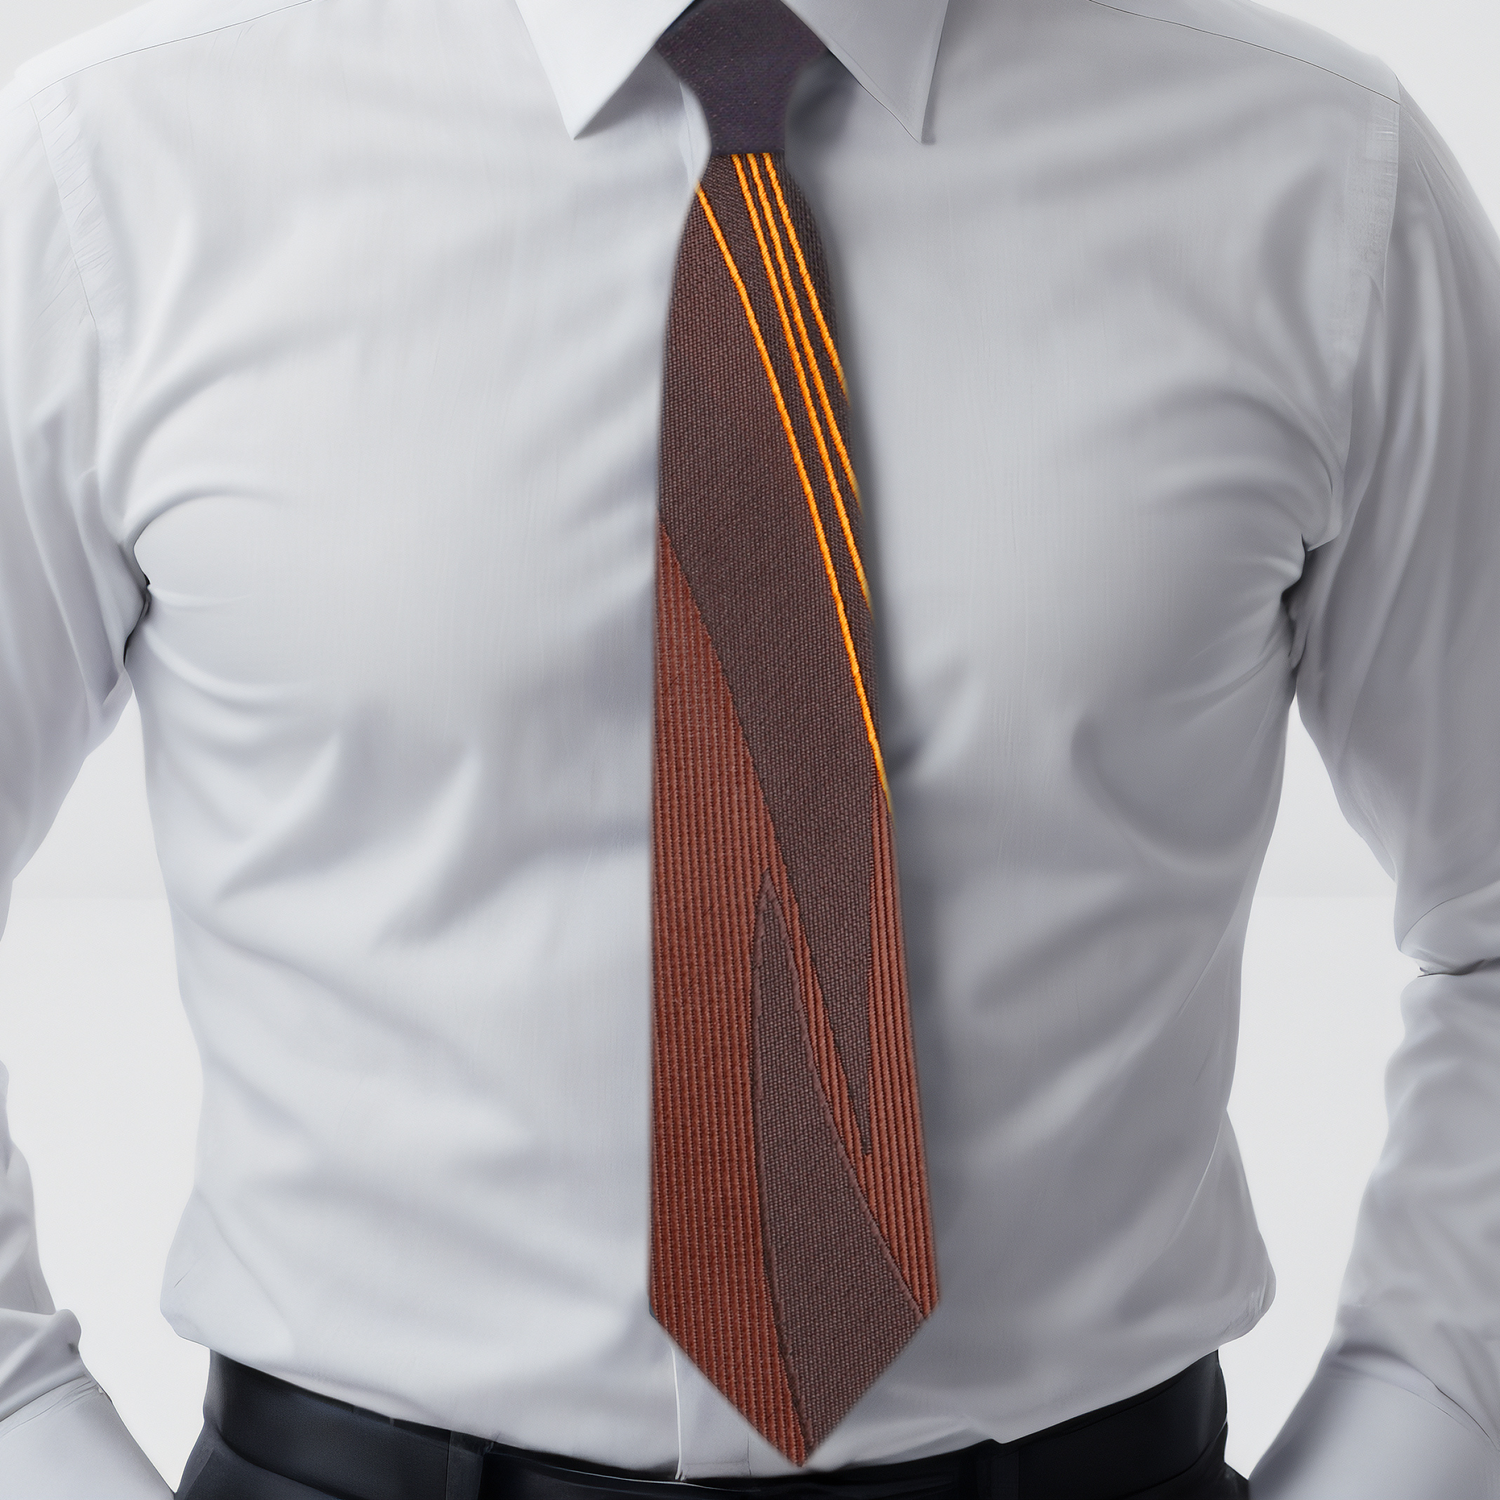 Shades of Brown Abstract Lines Tie On White Shirt